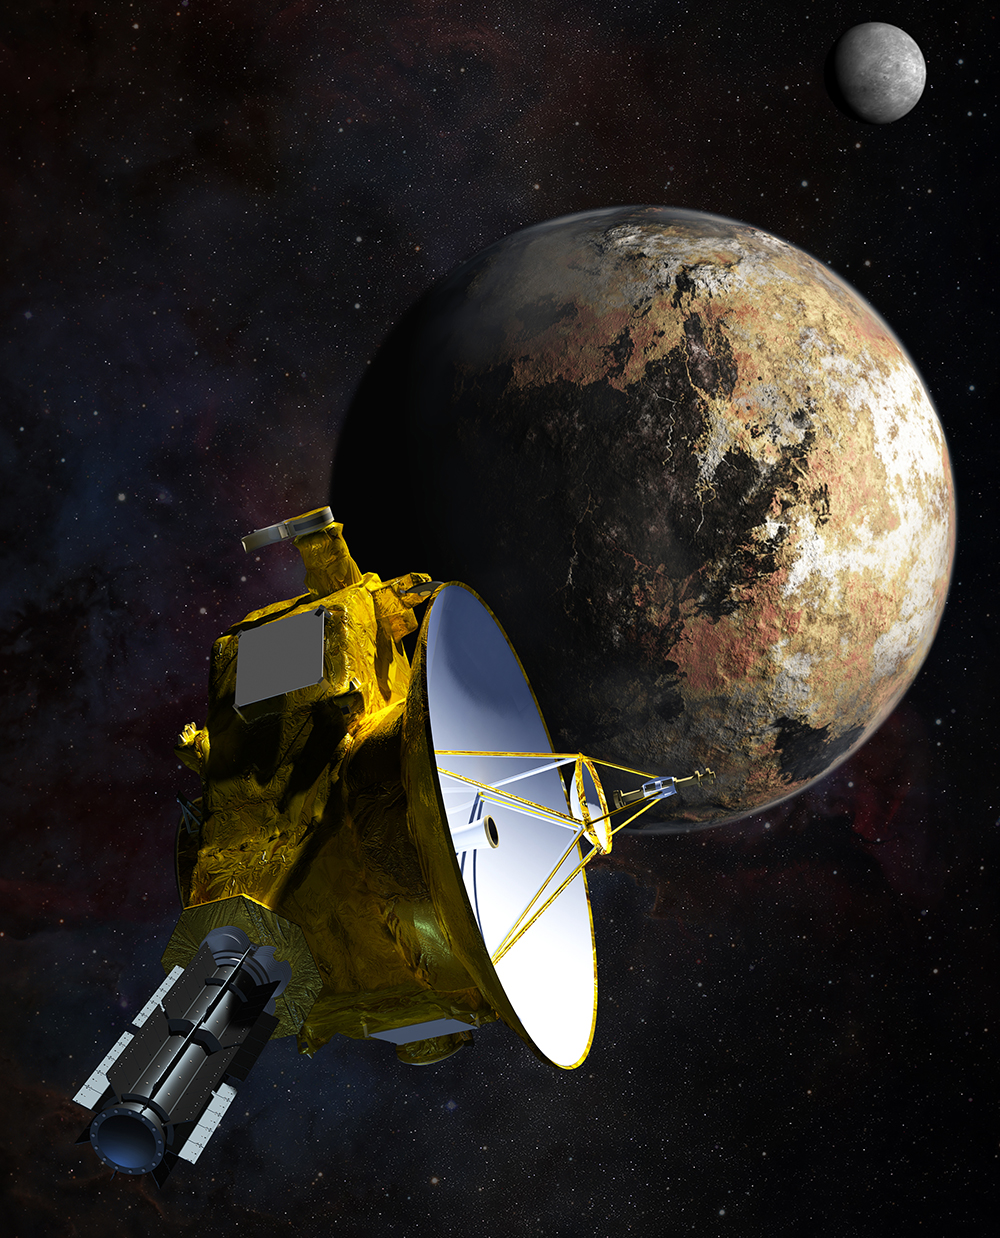 Artist’s concept of NASA’s New Horizons spacecraft as it passes by Pluto and its largest moon, Charon, in July 2015. Following its wake-up call from its hibernation late last year, the spacecraft has just entered the first leg of its approach phase to the Pluto system. Image Credit: NASA/JHU APL/SwRI/Steve Gribben